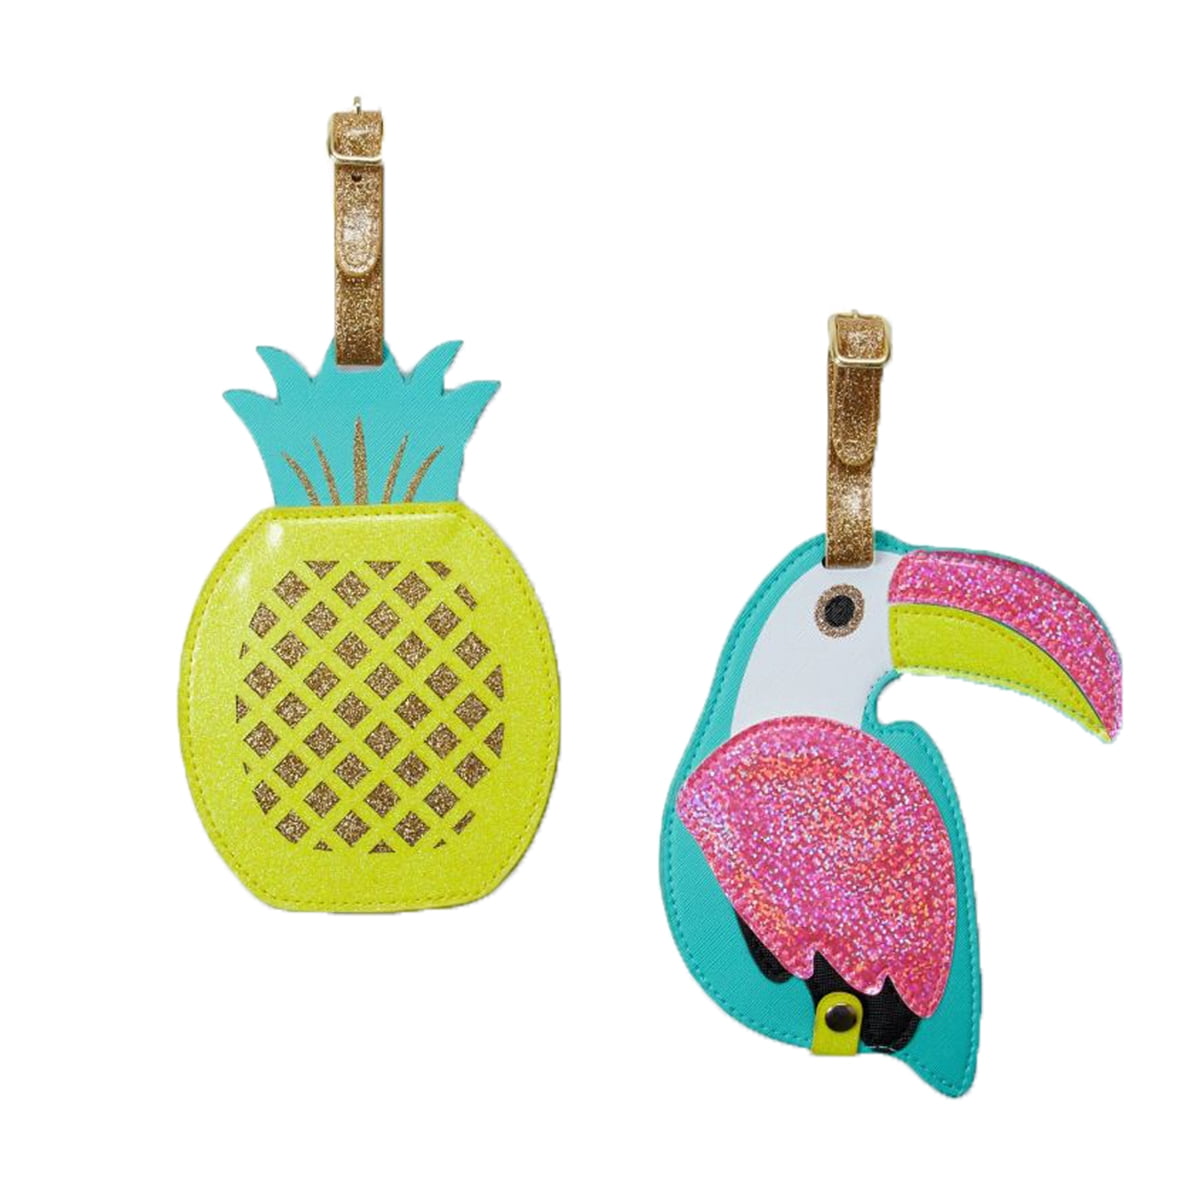 2 Pack Luggage Tags Pineapple Cruise Luggage Tag For Travel Bag Suitcase Accessories